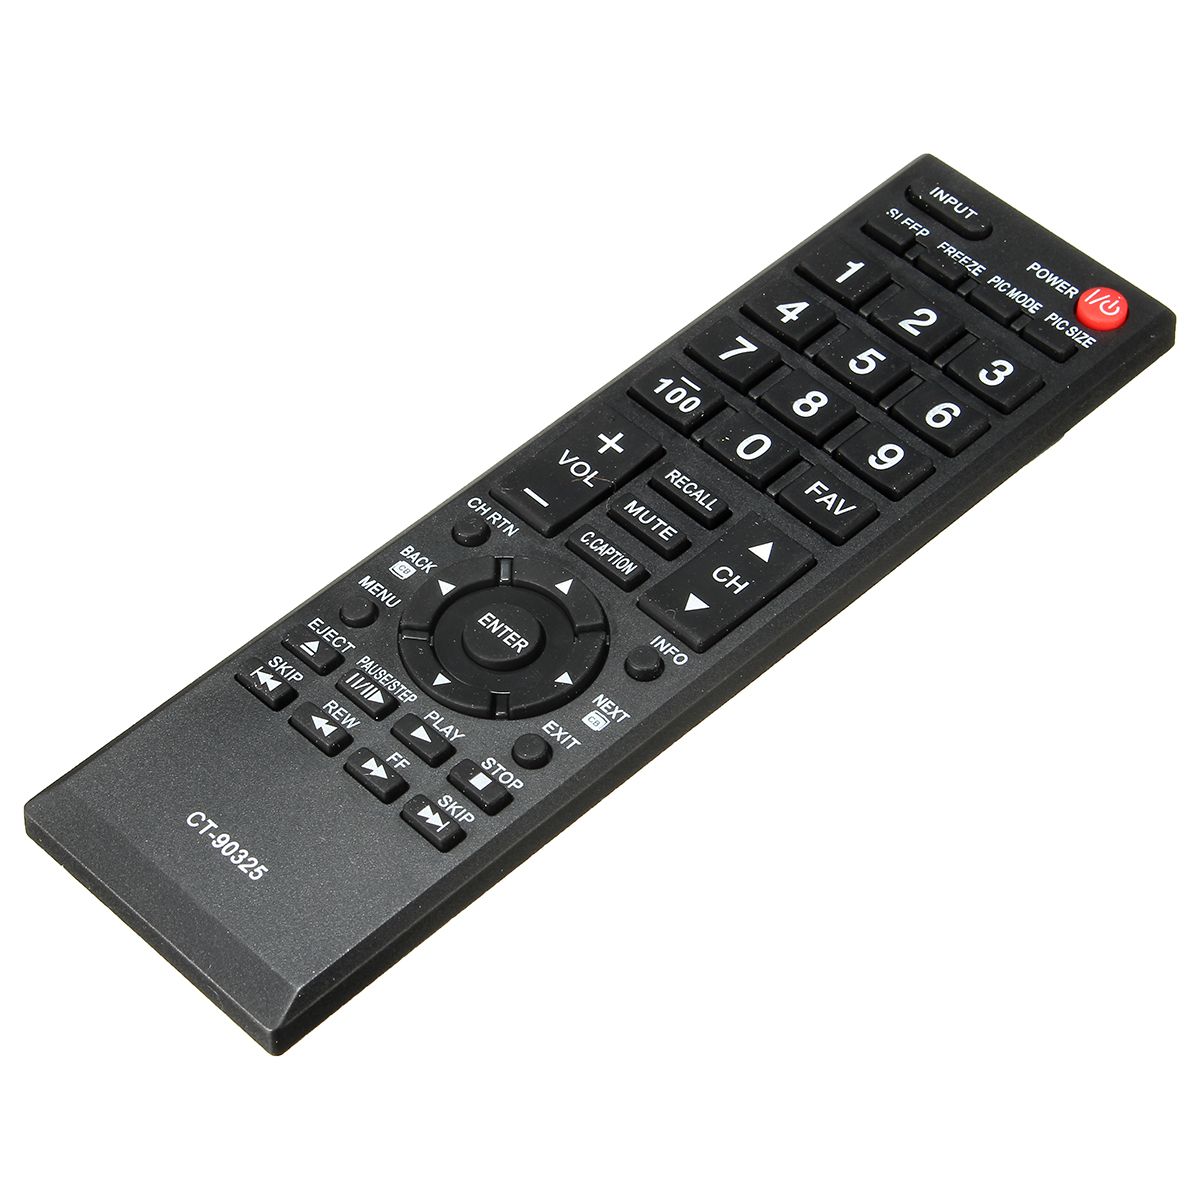 Replacement-TV-Remote-Control-For-Toshiba-CT90325-1124410